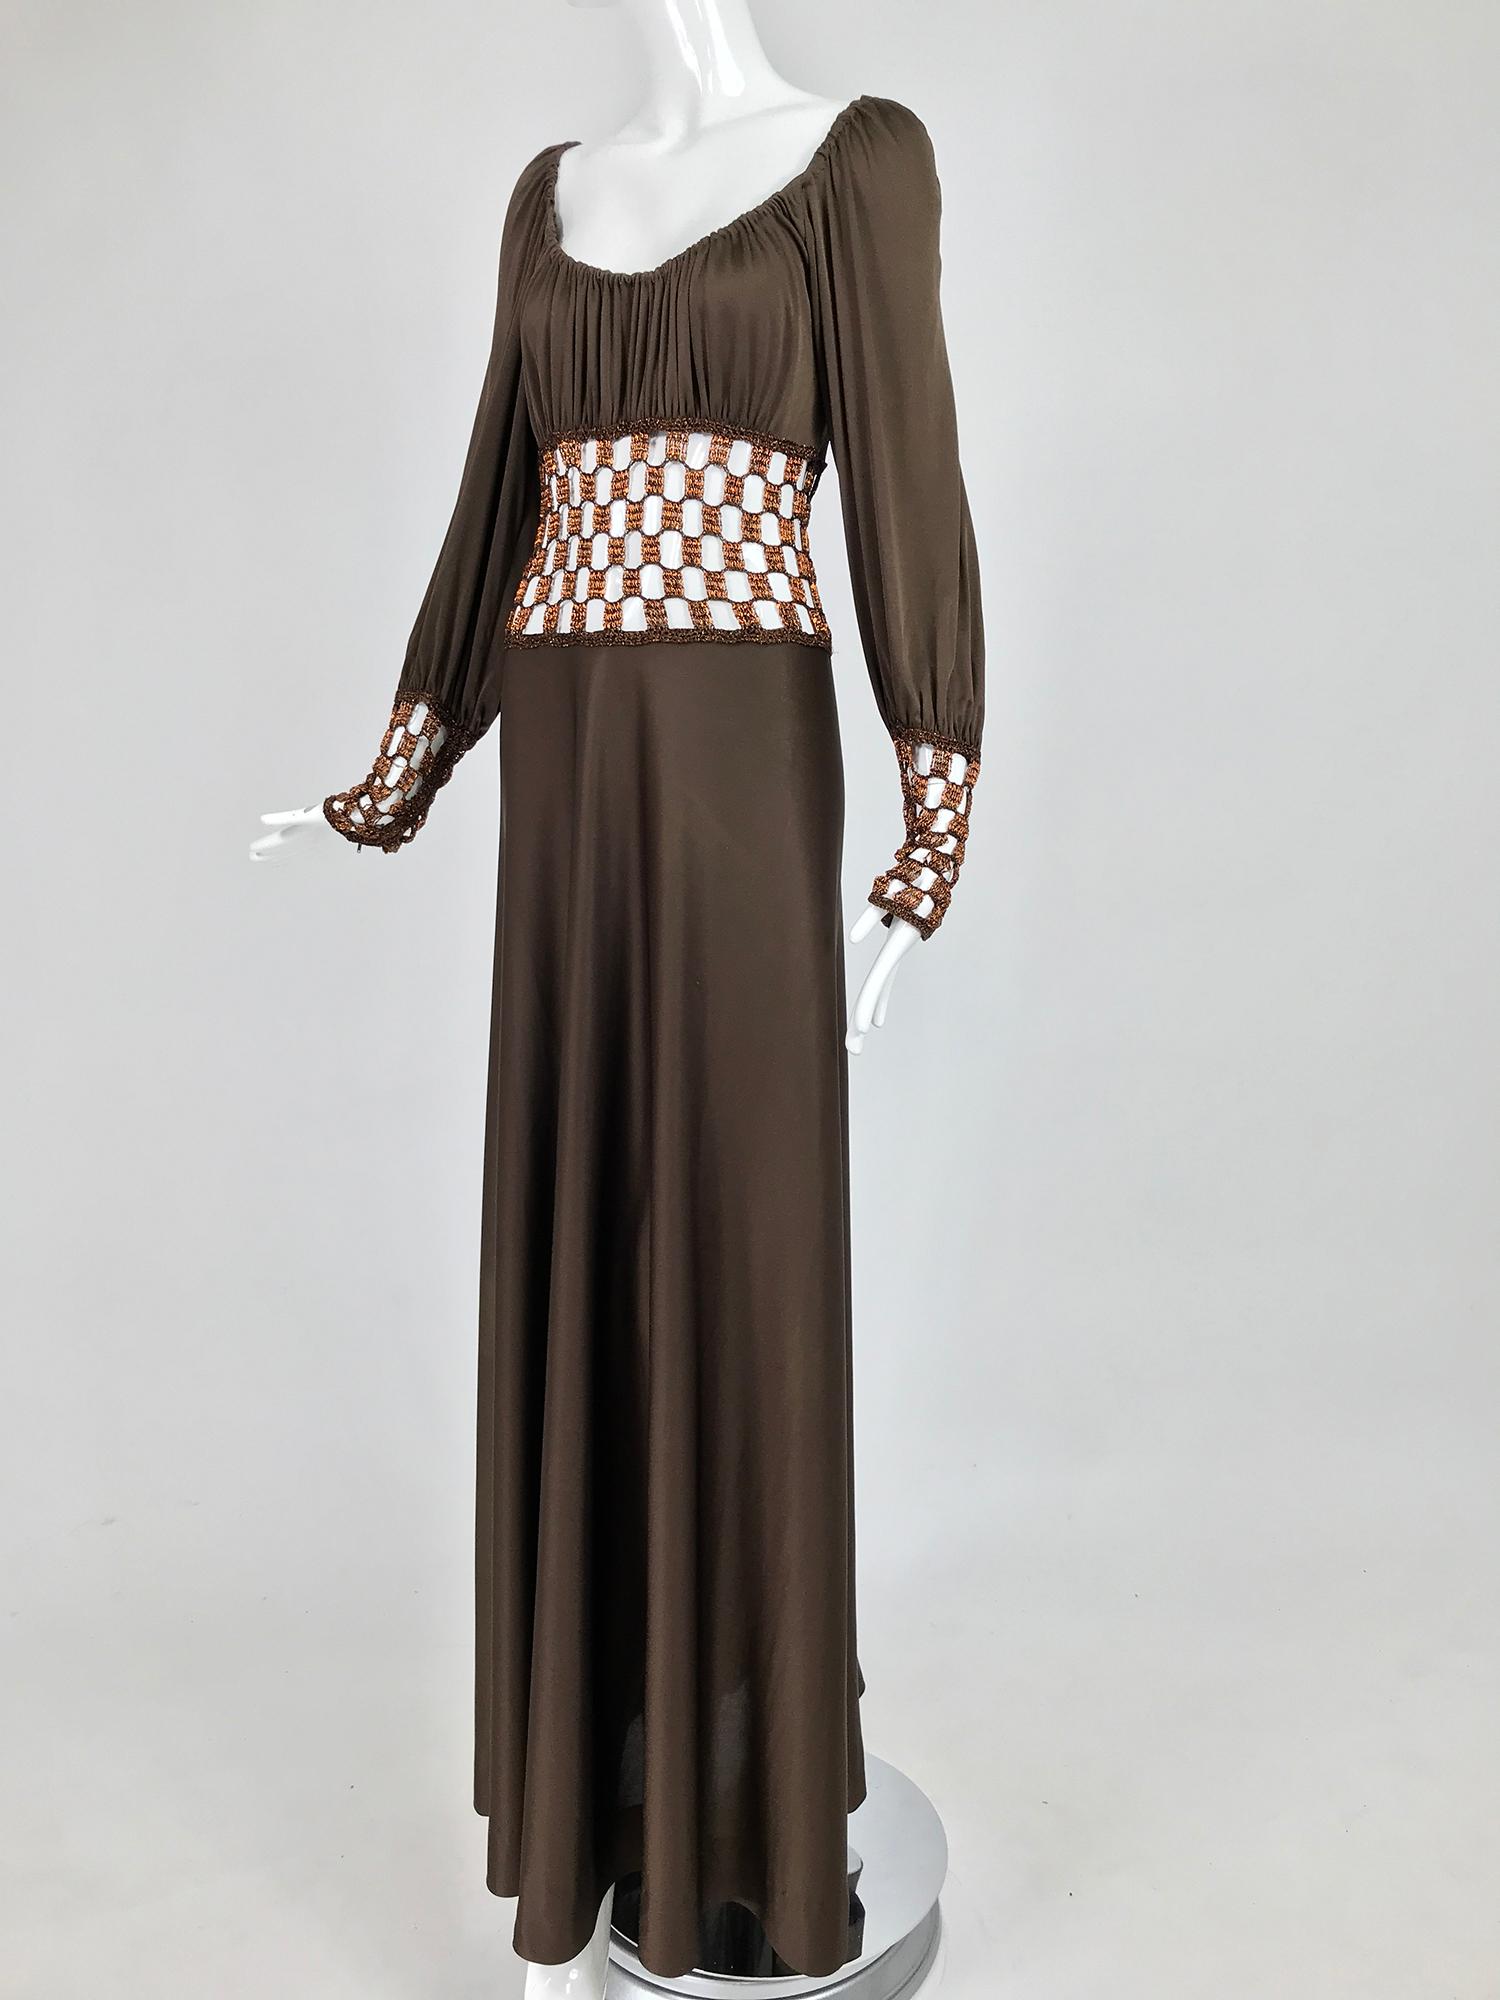 Loris Azzaro Couture metal chain and jersey maxi dress from the 1970s. This amazing dress is hand made of silky bias cut, chocolate brown jersey, the low scoop neckline is gathered at the front, shoulders tops and upper back edge. The waist of the